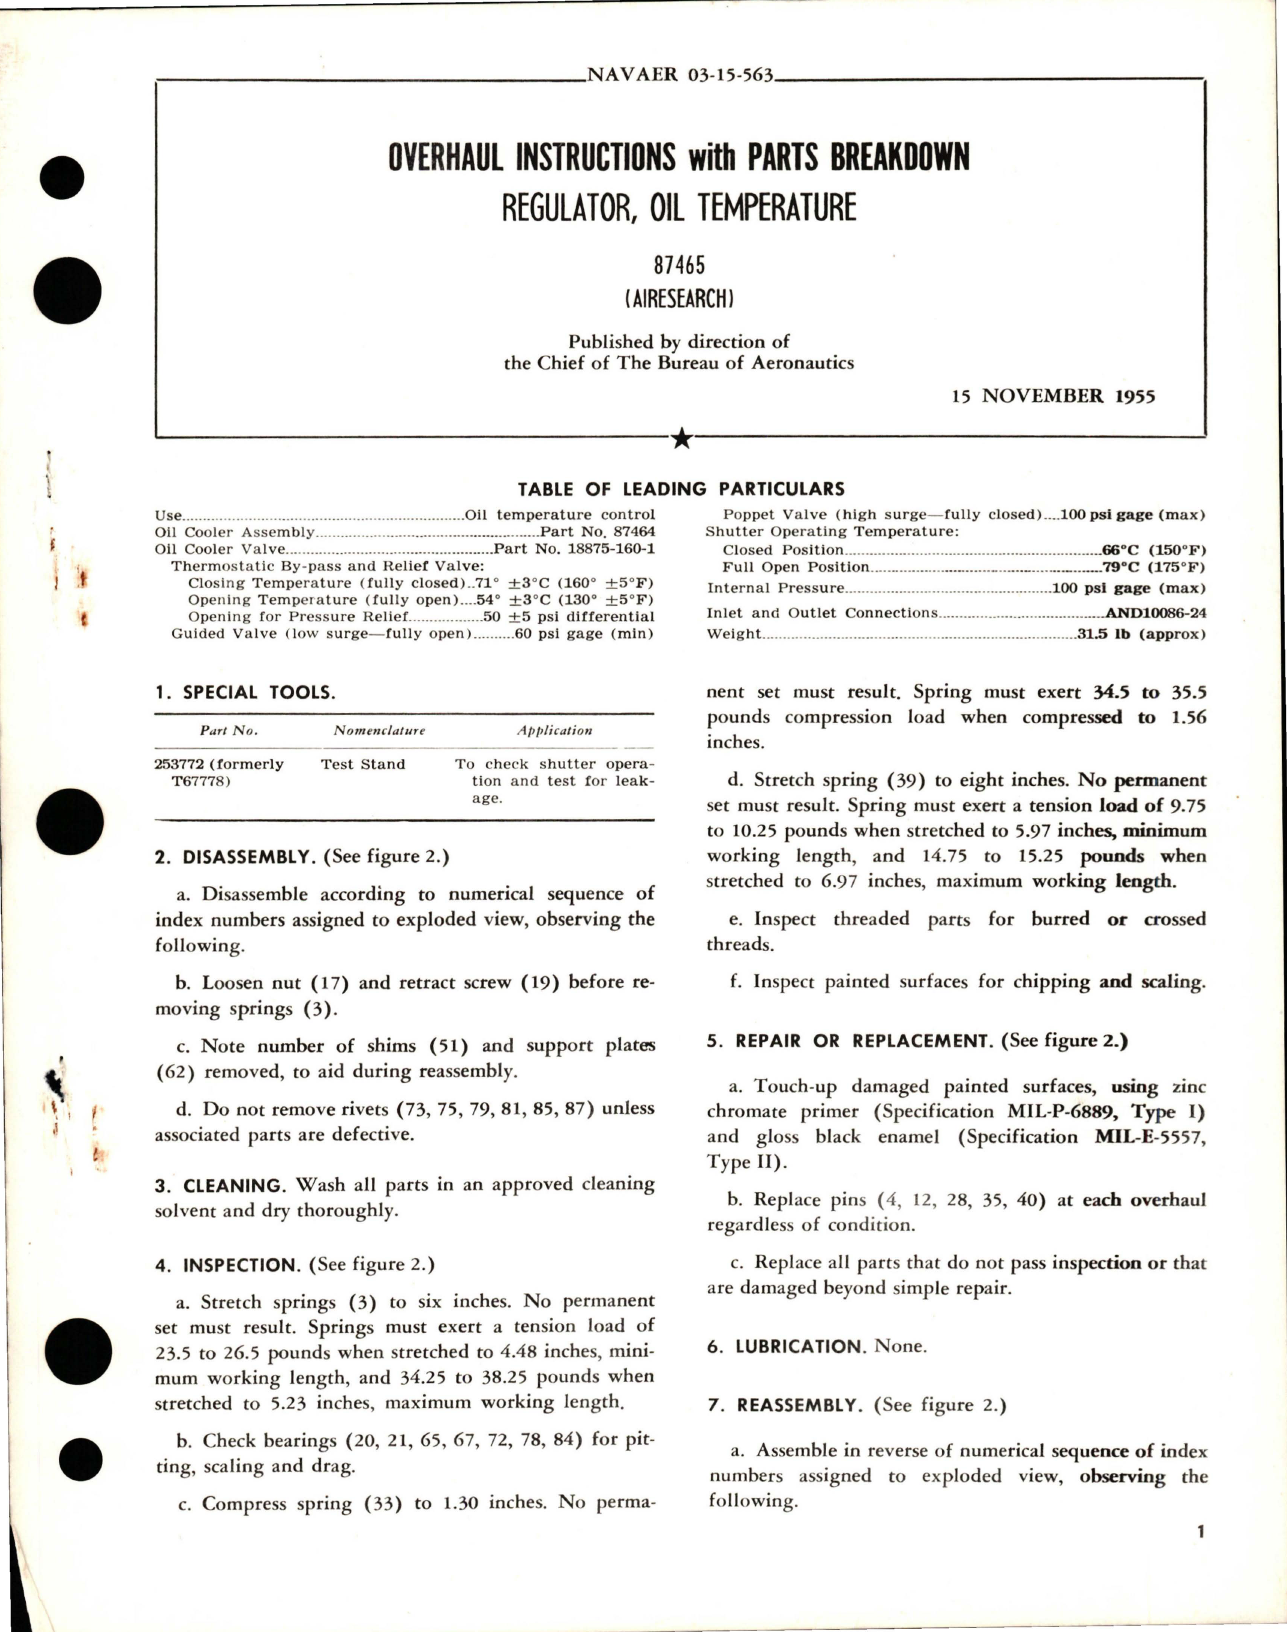 Sample page 1 from AirCorps Library document: Overhaul Instructions with Parts Breakdown for Oil Temperature Regulator - 87465